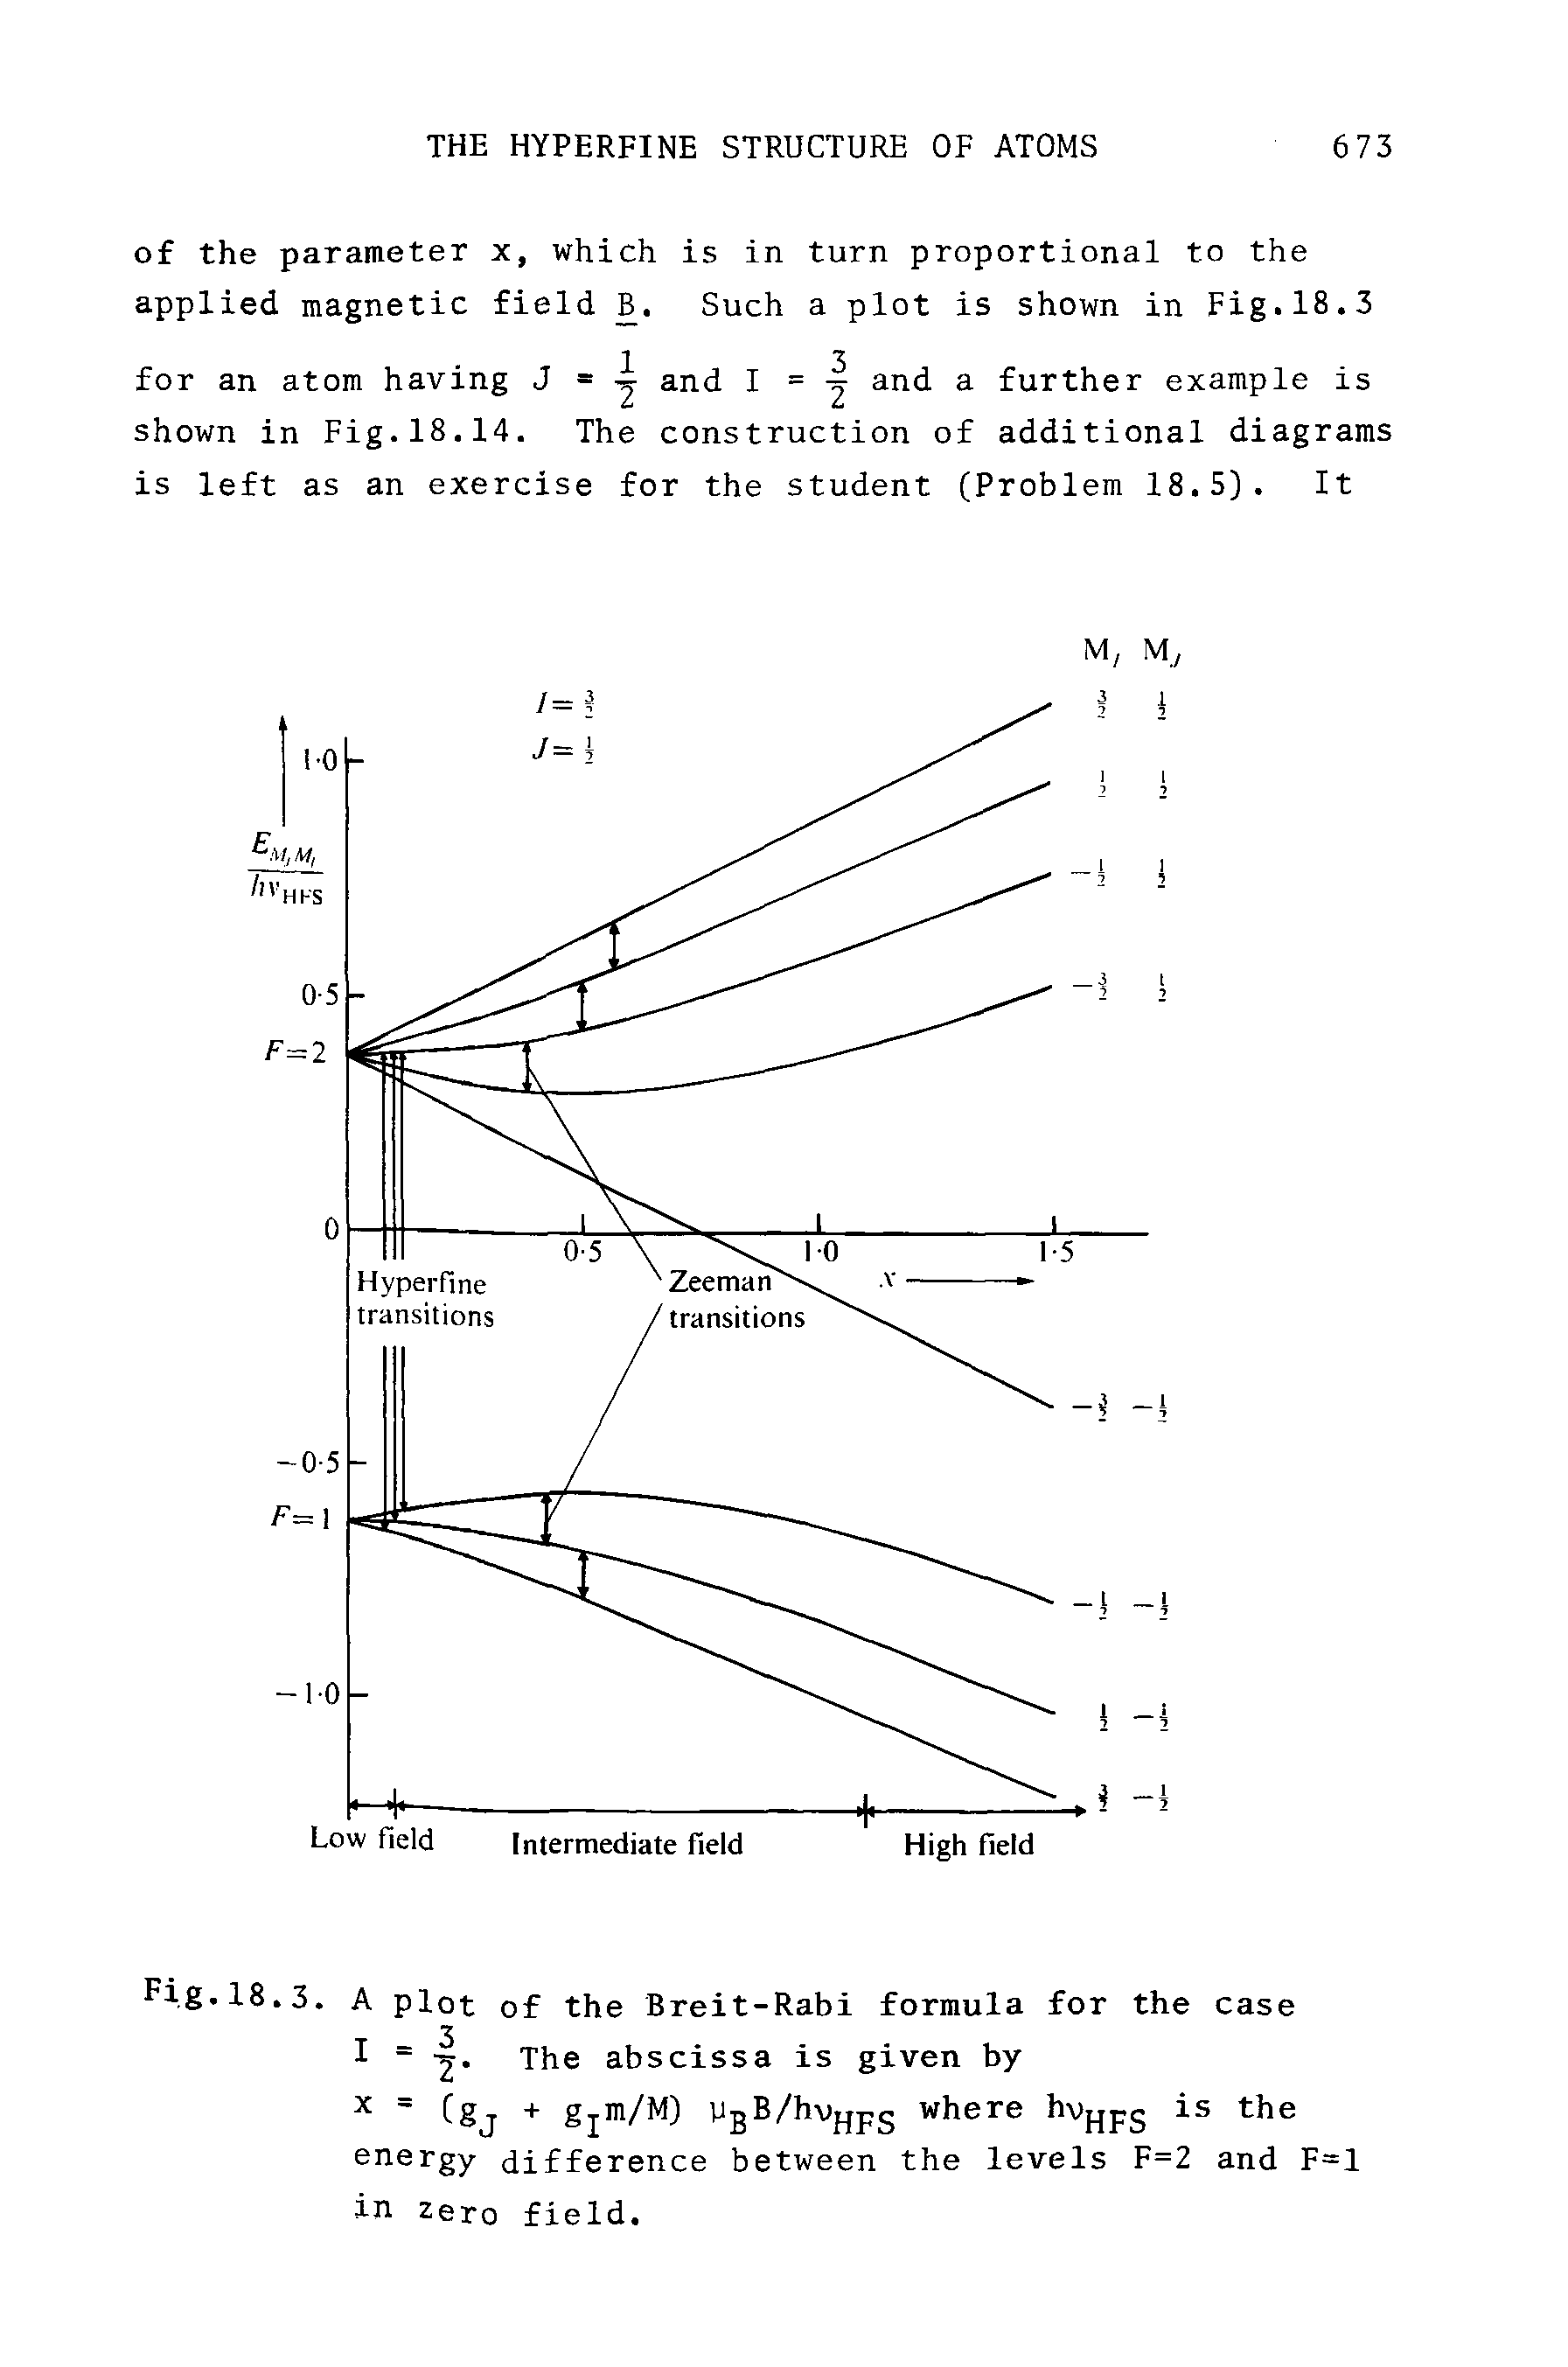 Fig.18.3. A plot of the Breit-Rabi formula for the case I = The abscissa is given by Cgj + gjin/M) PgB/hvjjpg where hvp pg is the energy difference between the levels F=2 and F=1 in zero field.